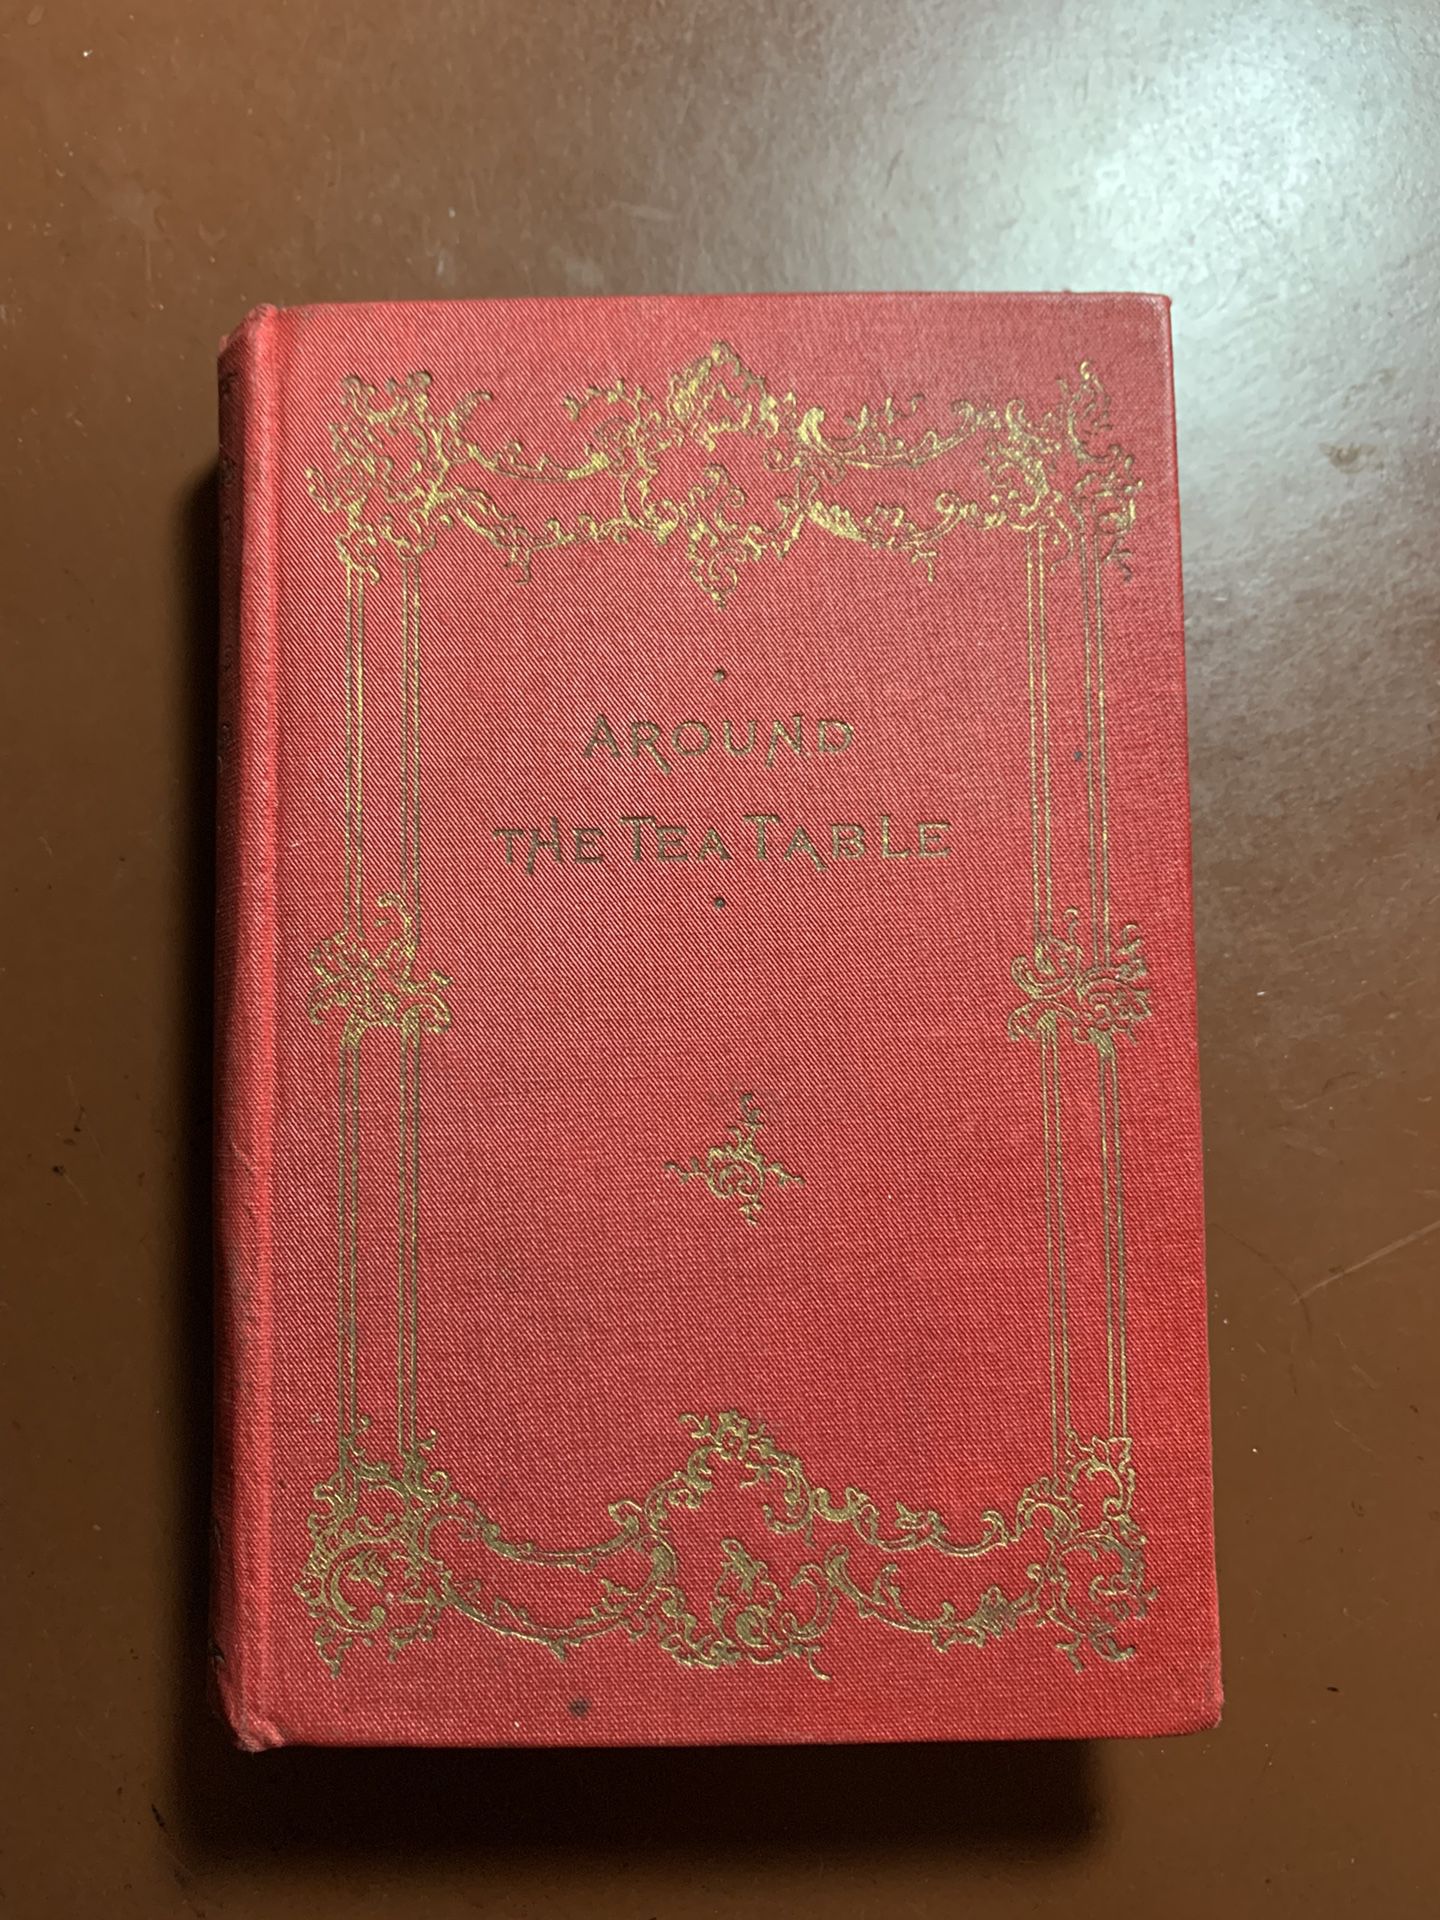 Vintage 1895 Parlor Book: “AROUND THE TEA TABLE” by T. DeWitt Talmage